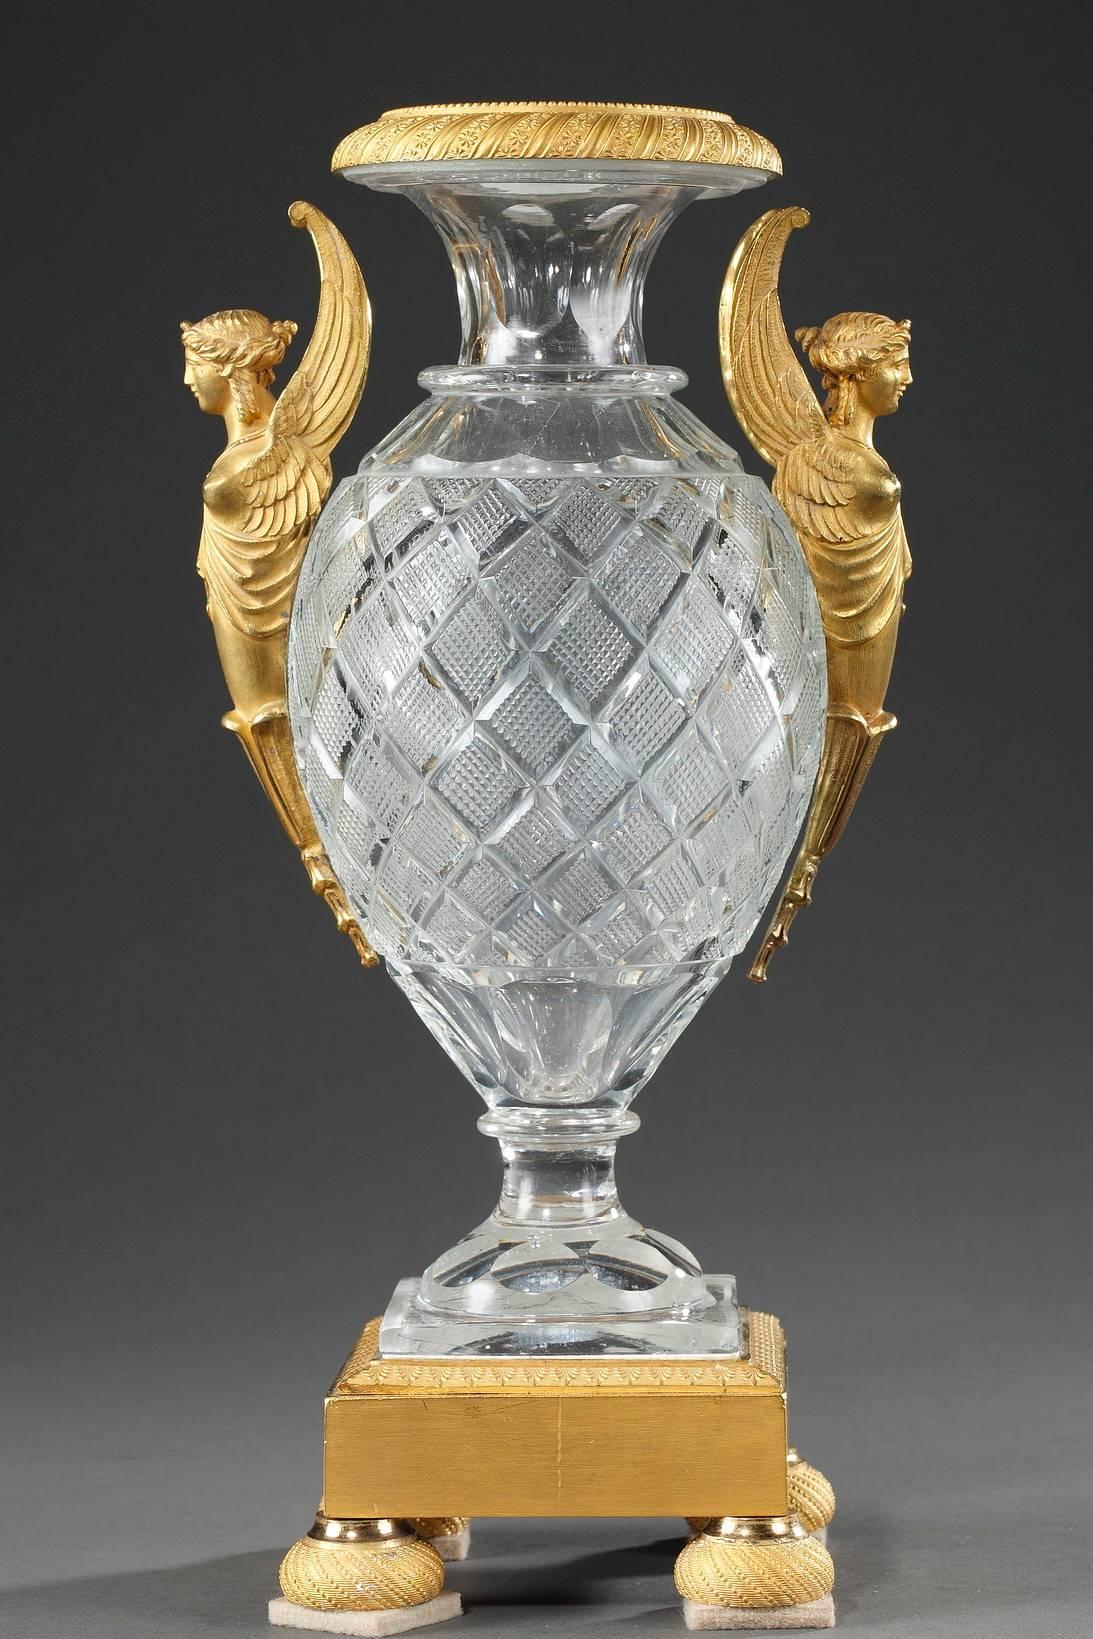 Pair of oval, crystal, Medici vases featuring gilt bronze sphinx-shaped handles. Each vase rests on a gilt bronze, square base that is sculpted with friezes of palmettes and rests on four half-ball feet that are decorated with spiralling beadwork.
